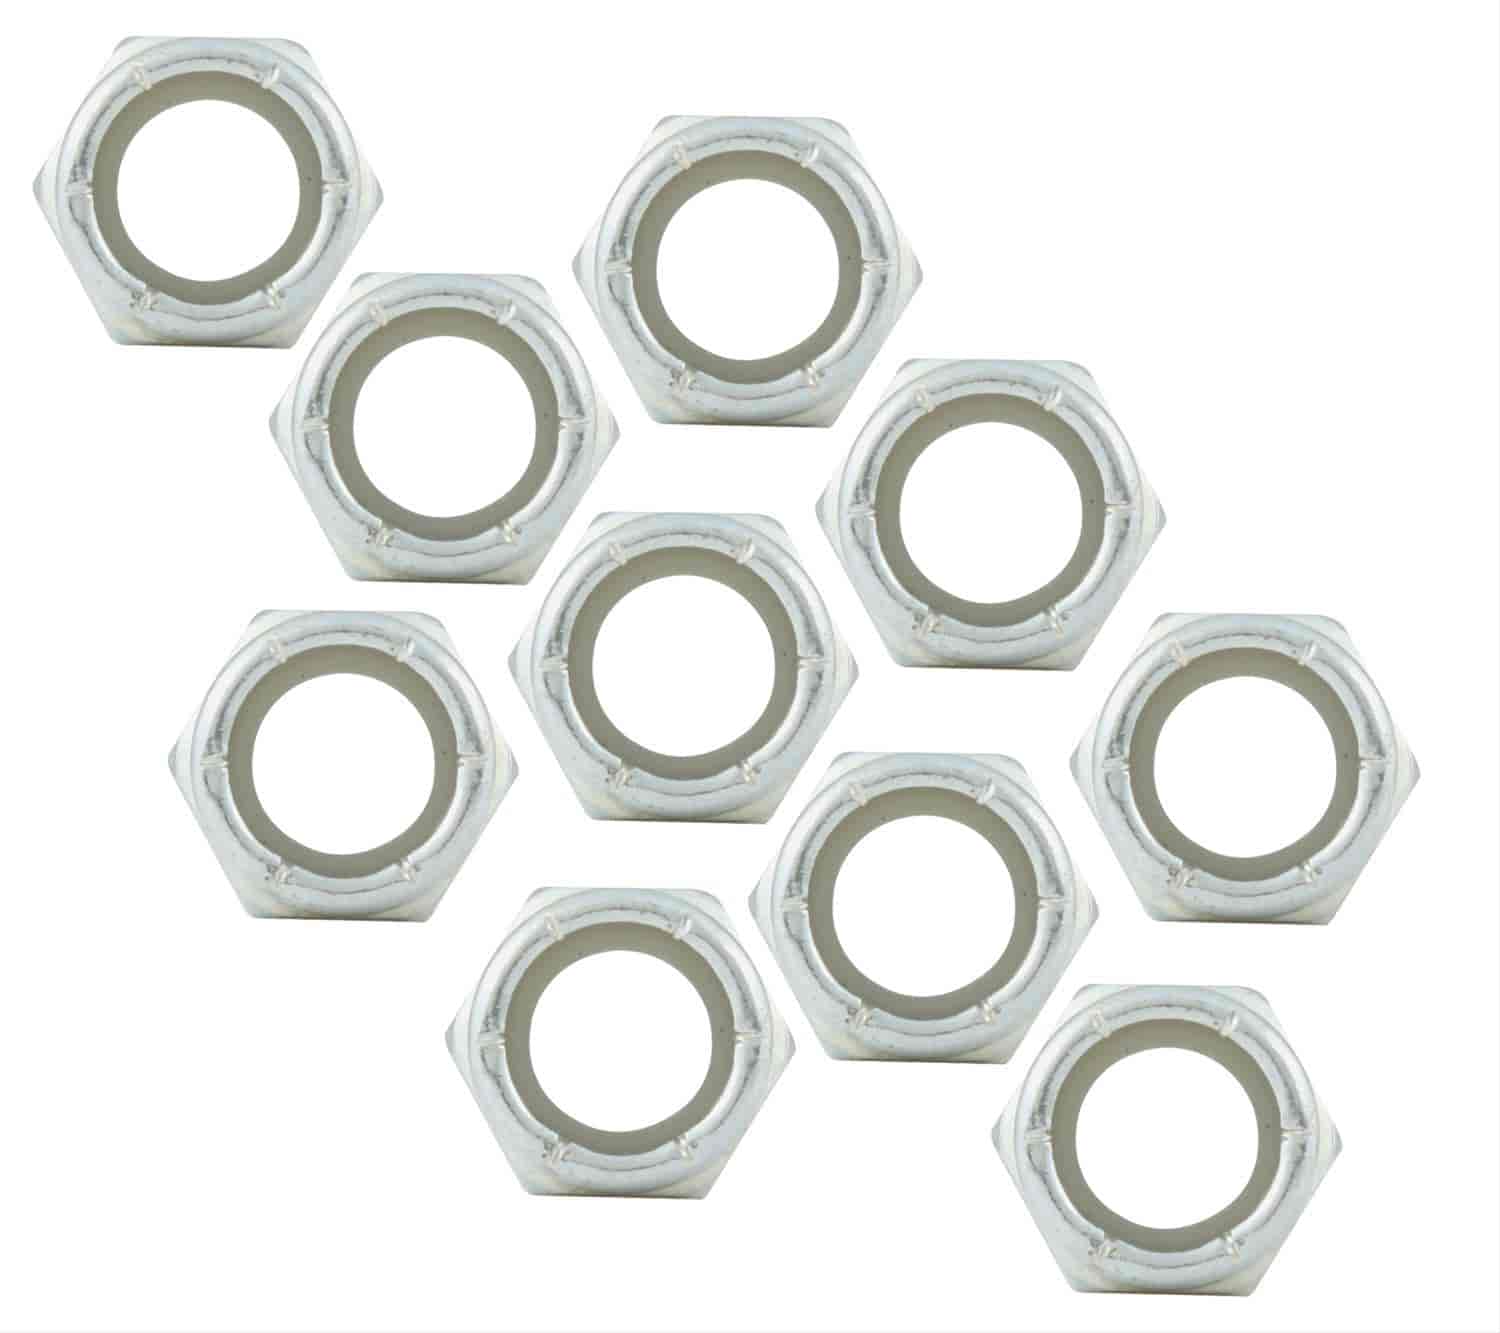 Fine Thread Hex Nuts With Nylon Inserts 7/16"-20